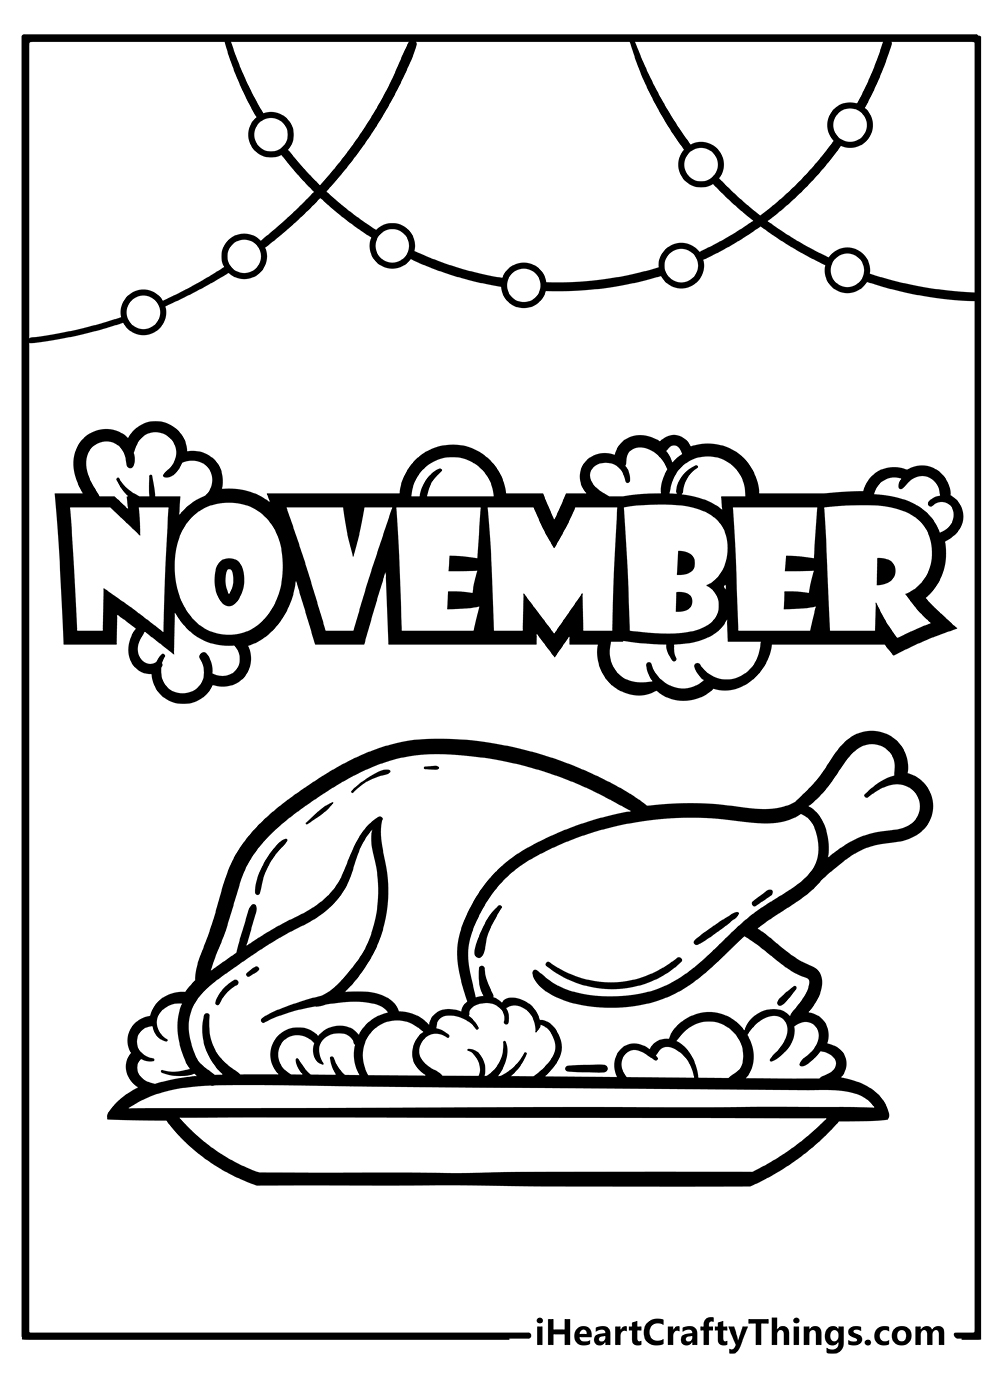 November Coloring Pages for kids free download